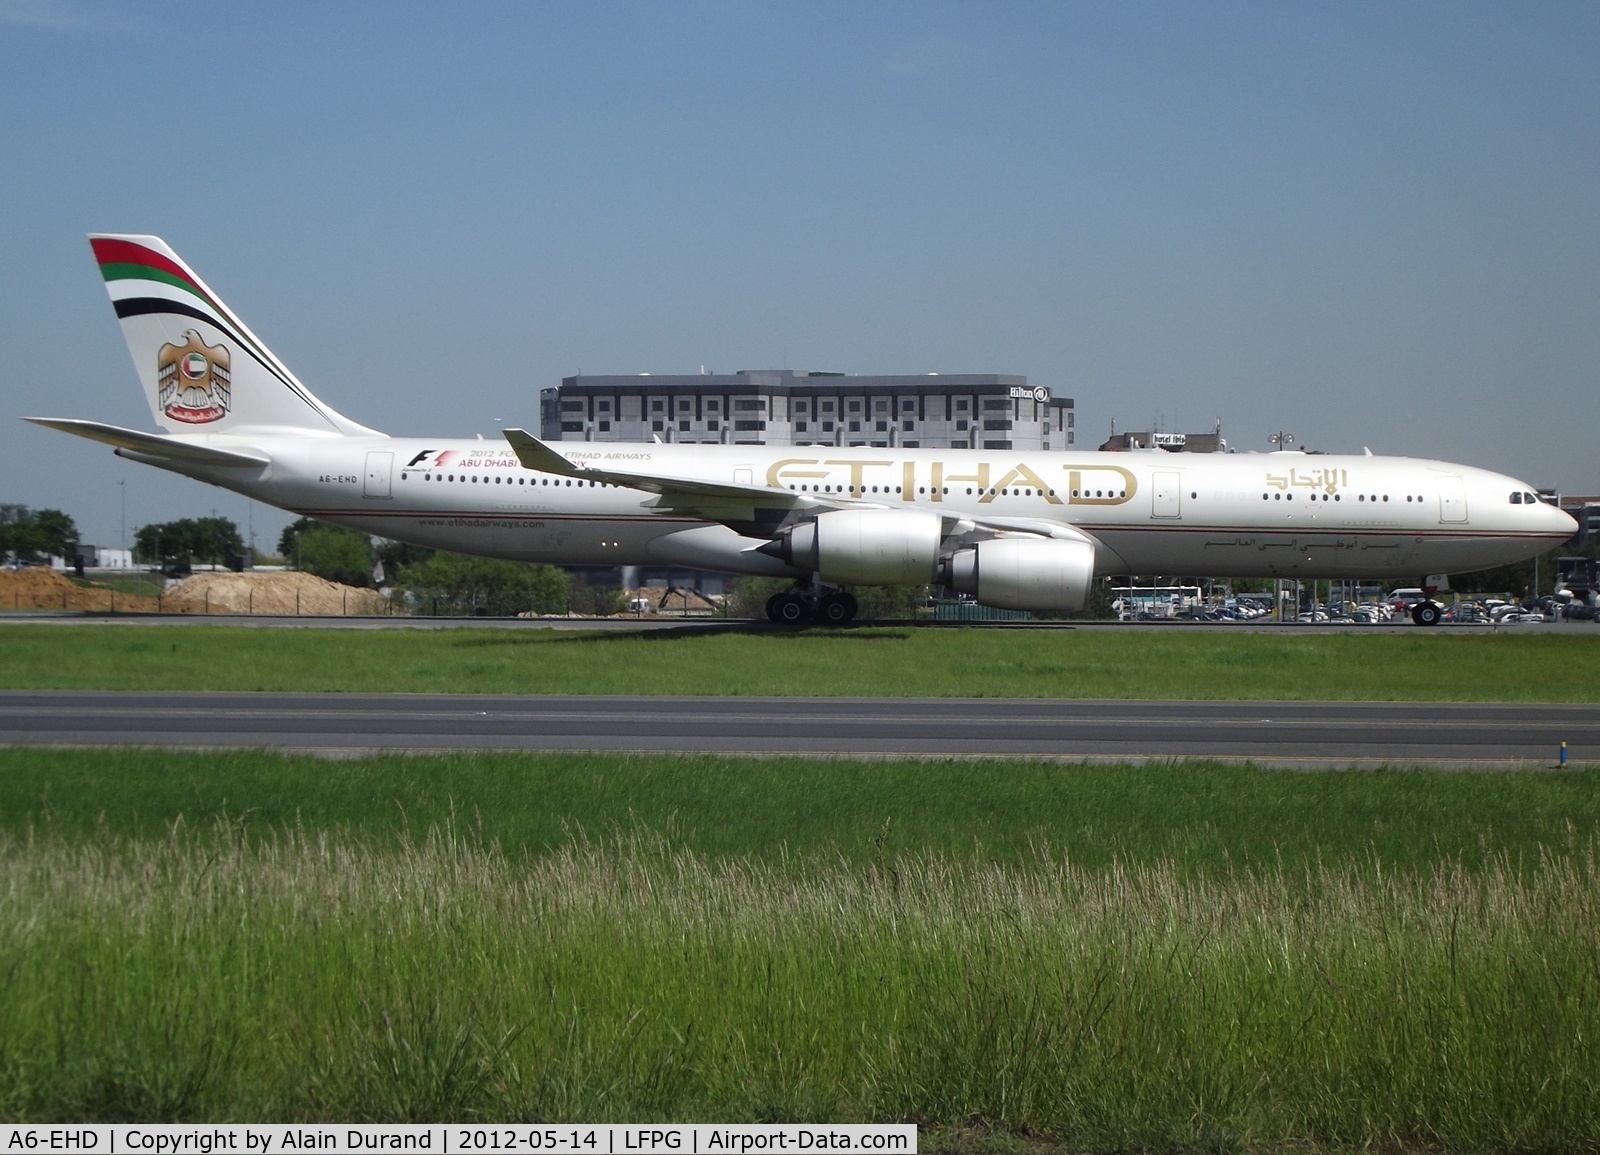 A6-EHD, 2006 Airbus A340-541 C/N 783, Leased by UTHL, Hotel-Delta is one of four A345s in Etihad's fleet inventory.